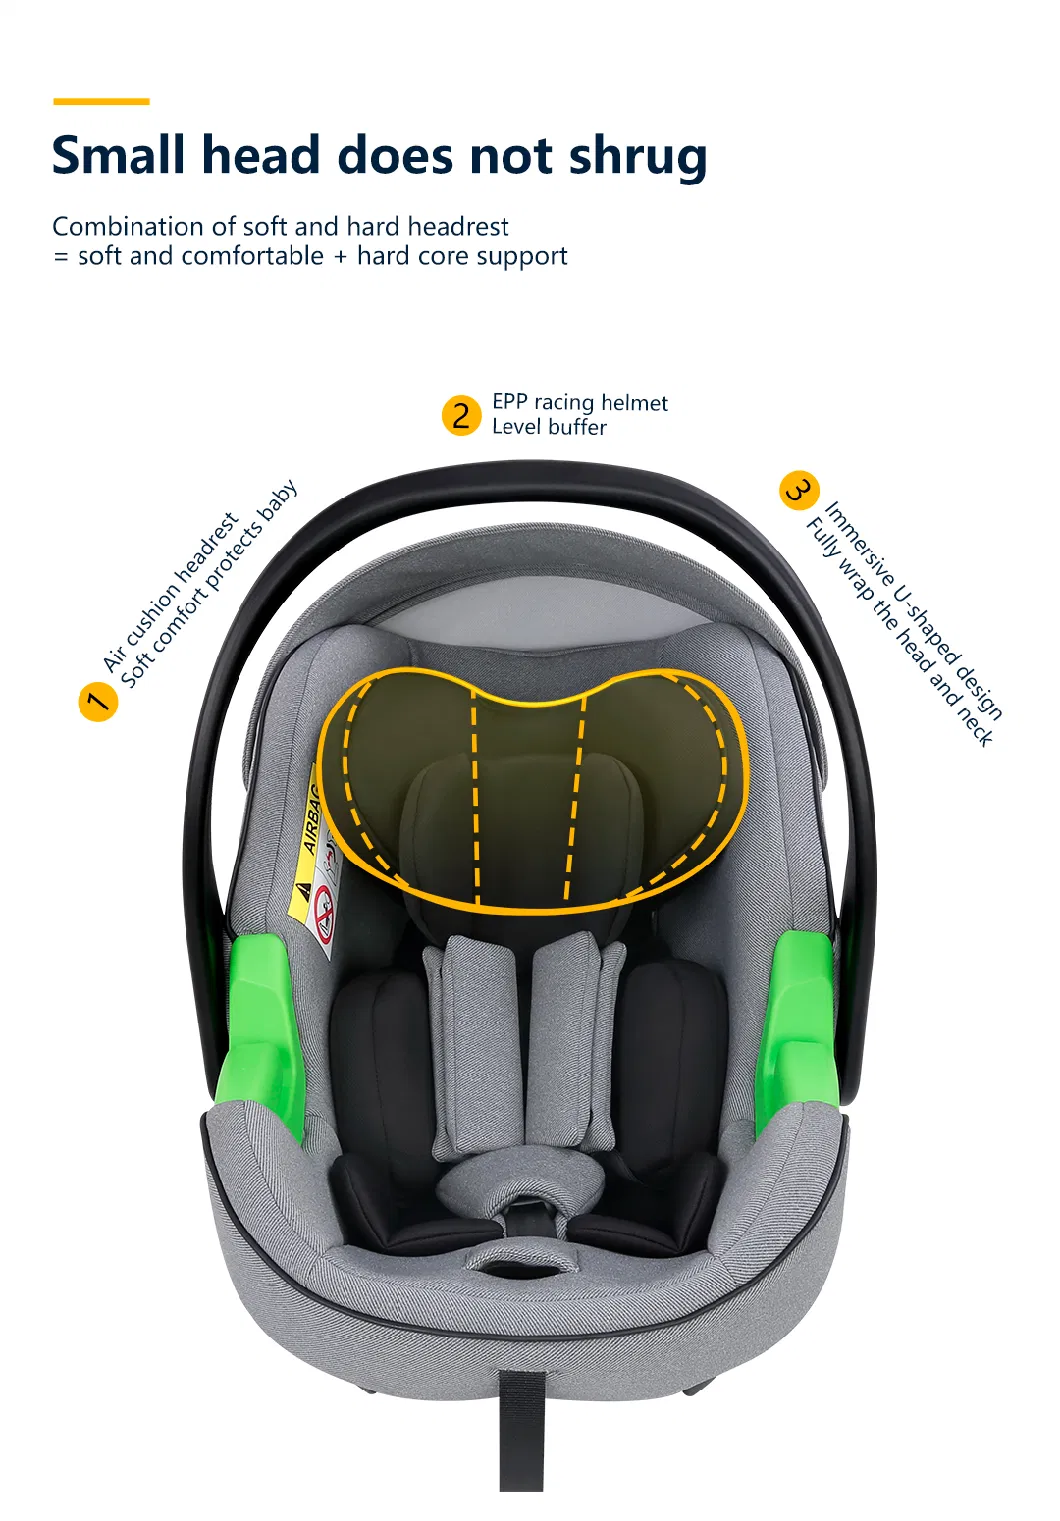 Chinese New Baby Kids Children Infant Car Seat with Cetification